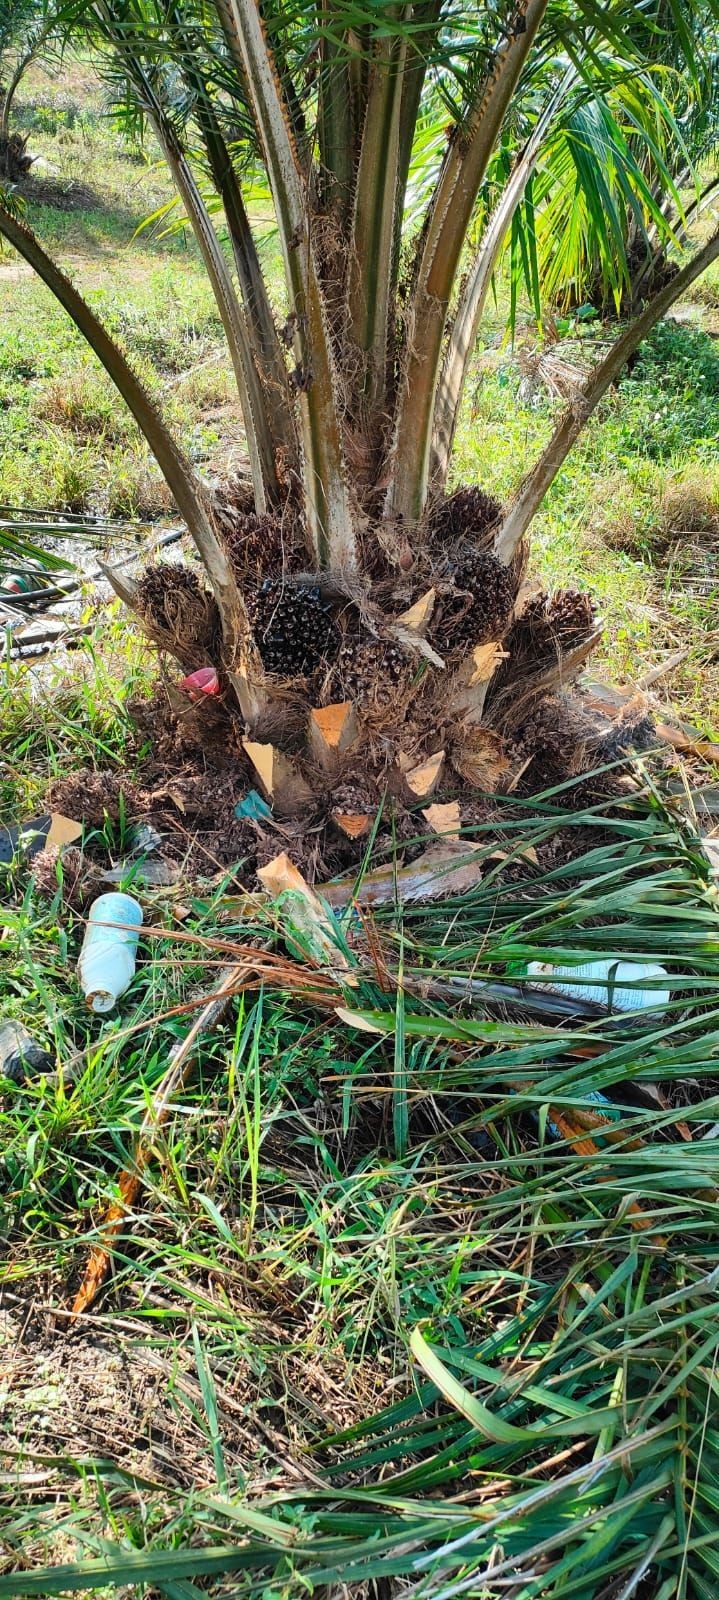 Empty containers of chemicals used in oil palm cultivation under Peren district. (Photo Courtesy of the author)